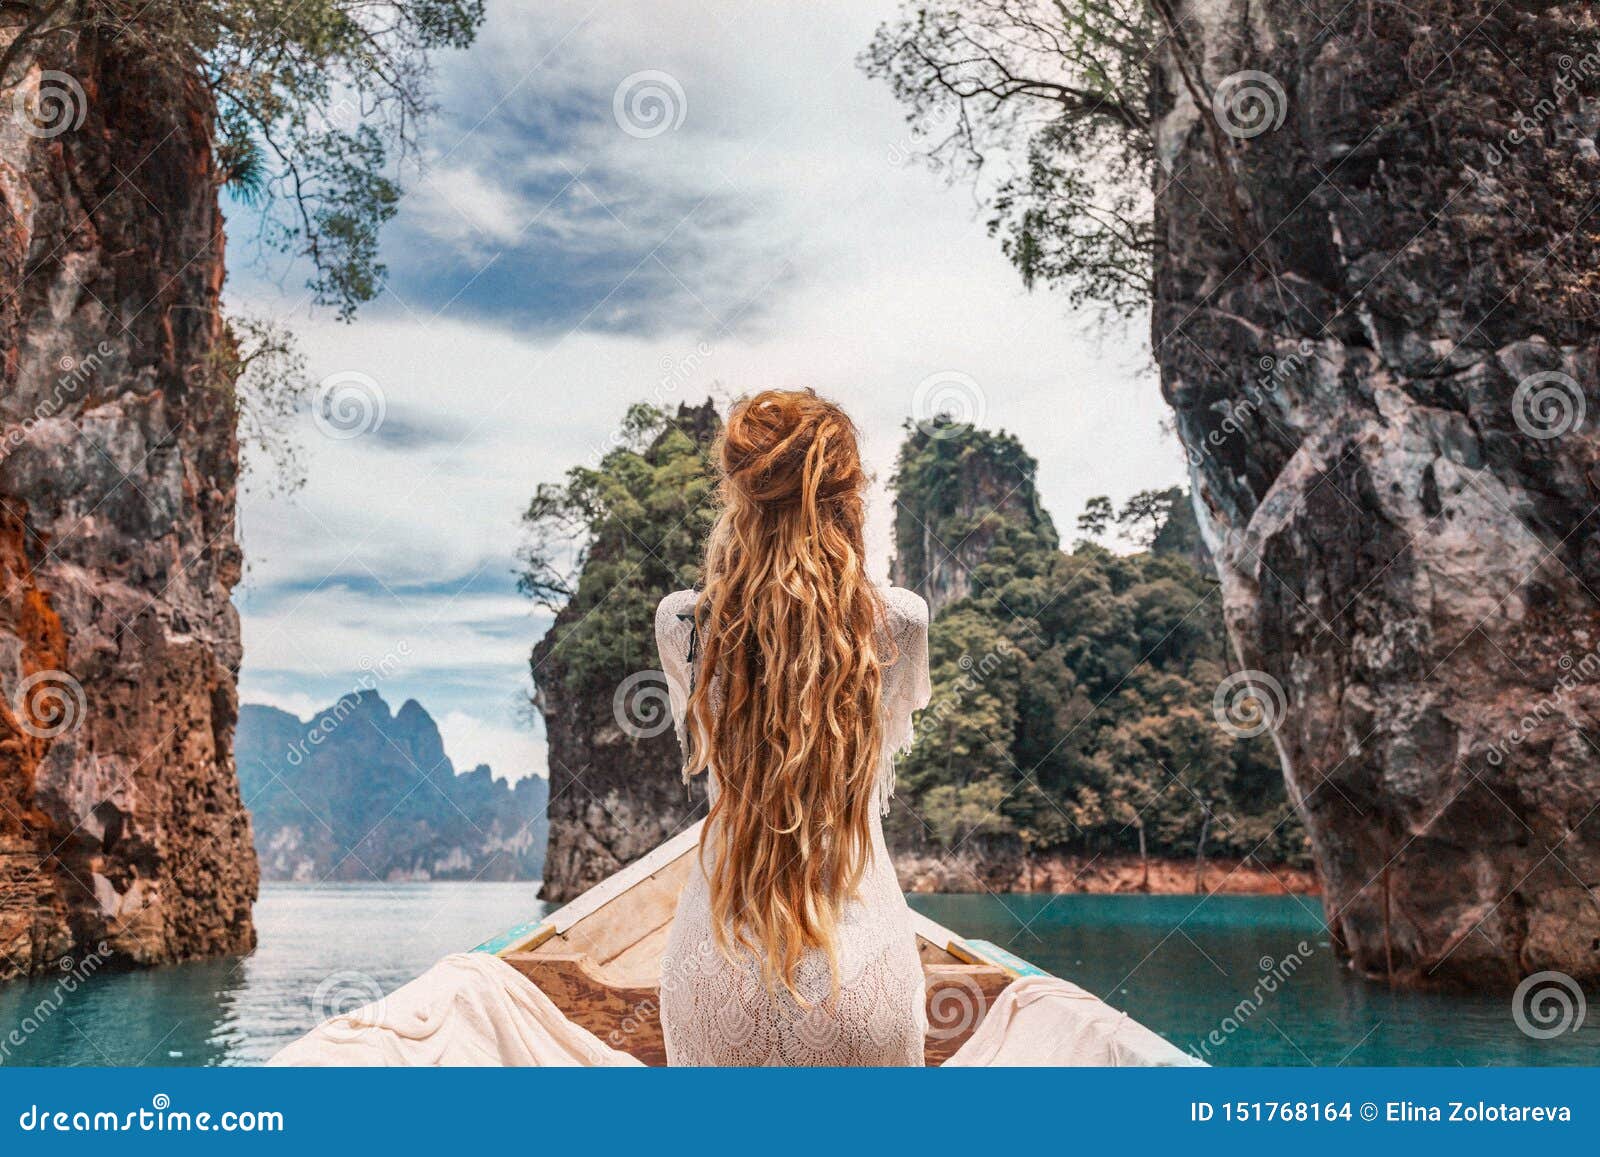 fashionable young model in boho style dress on boat at the lake